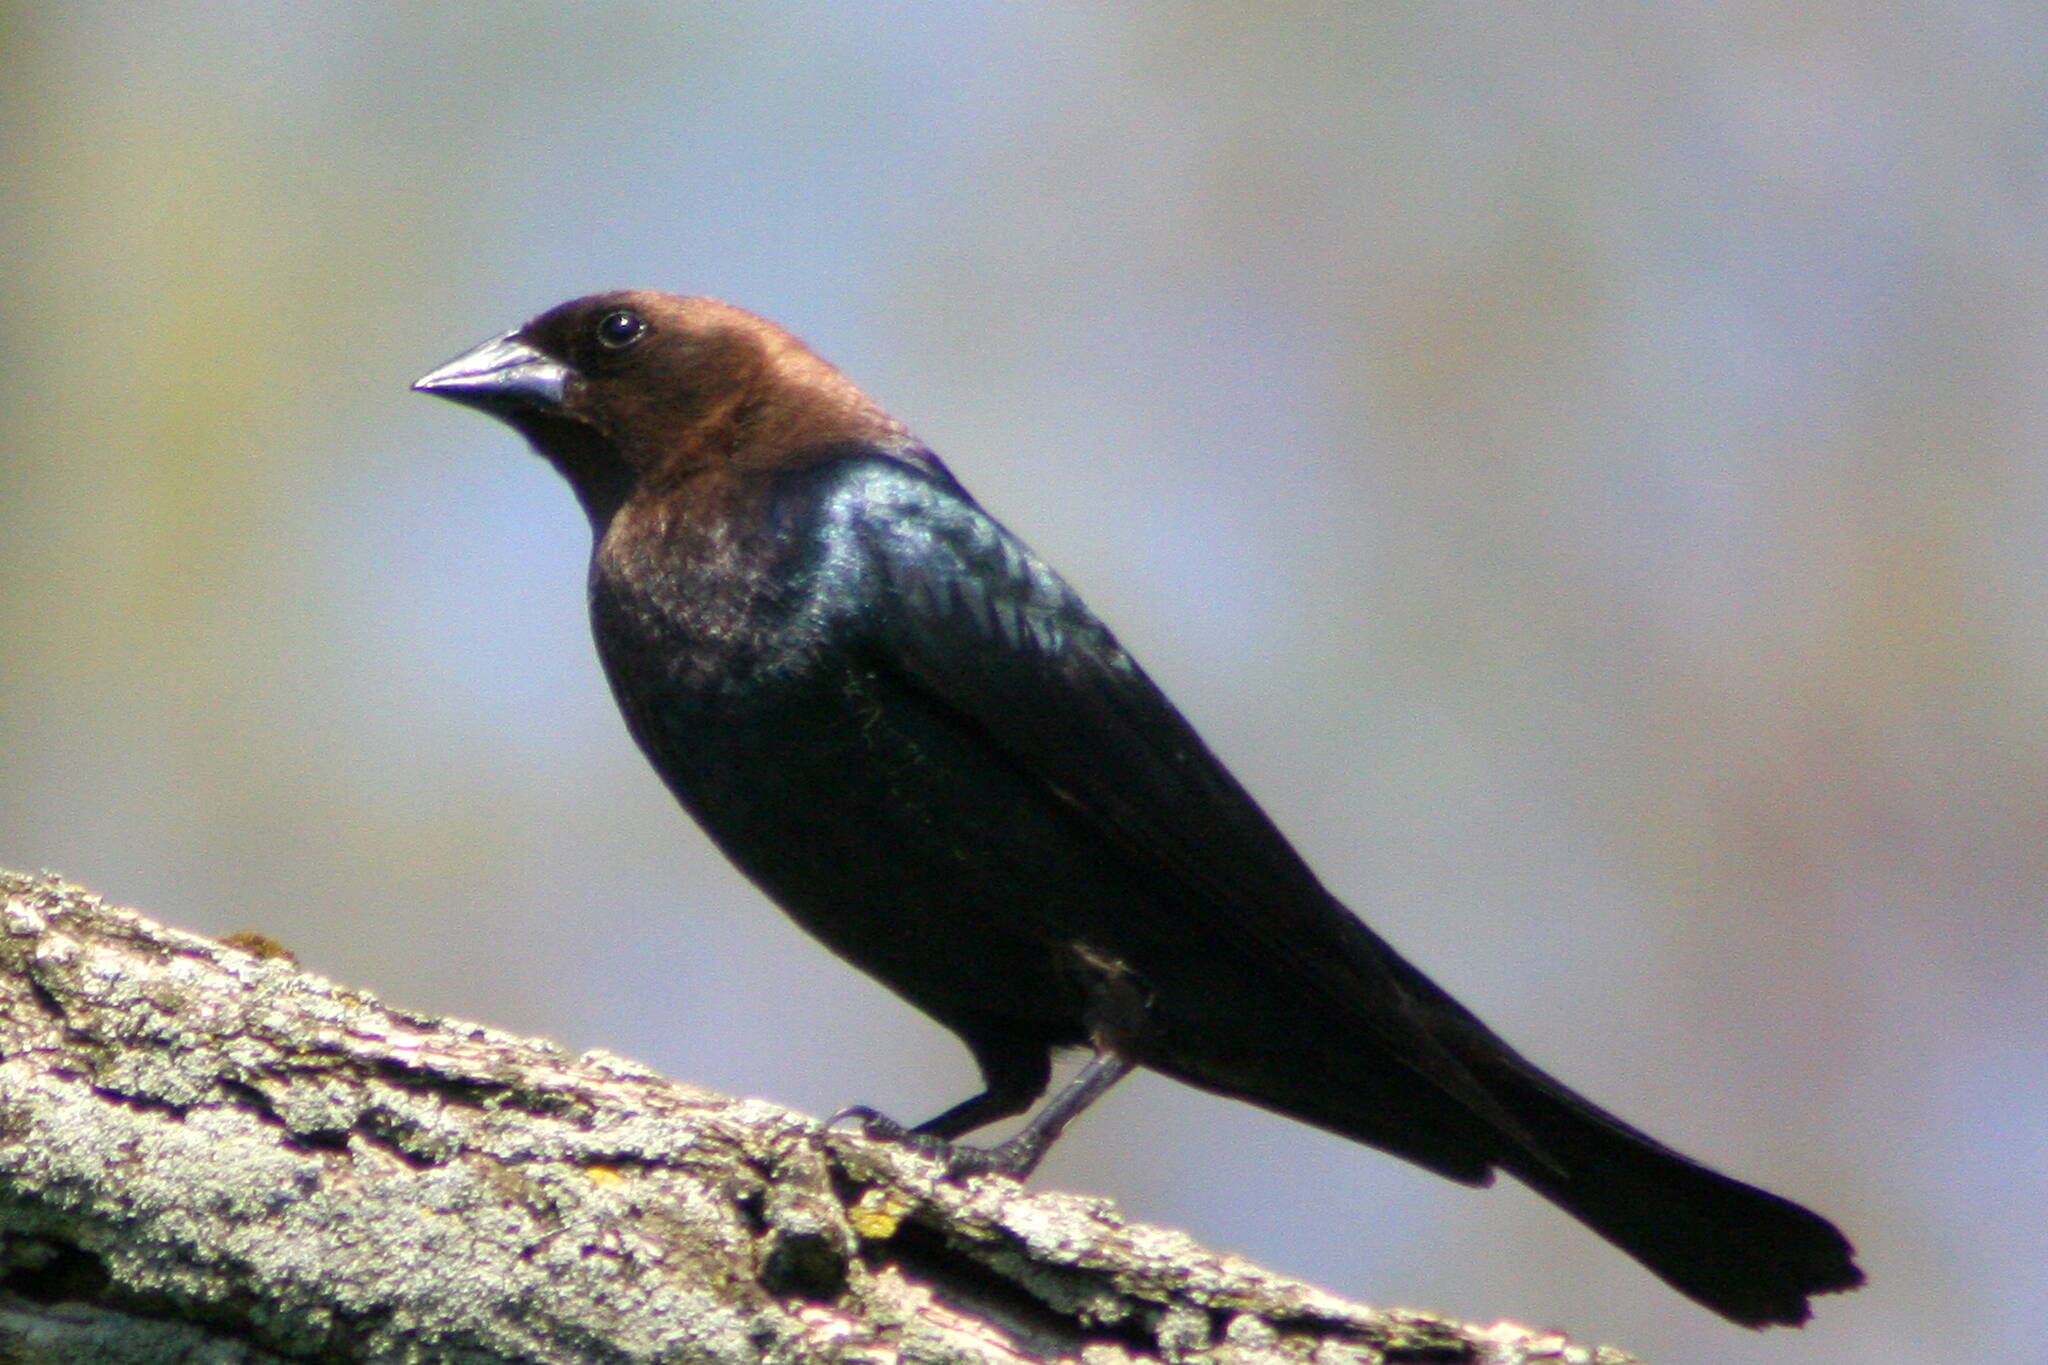 Brown-headed cowbirds are professional egg-dumpers, always parasitizing the nests of other species. (CC BY 2.0 public domain photo).